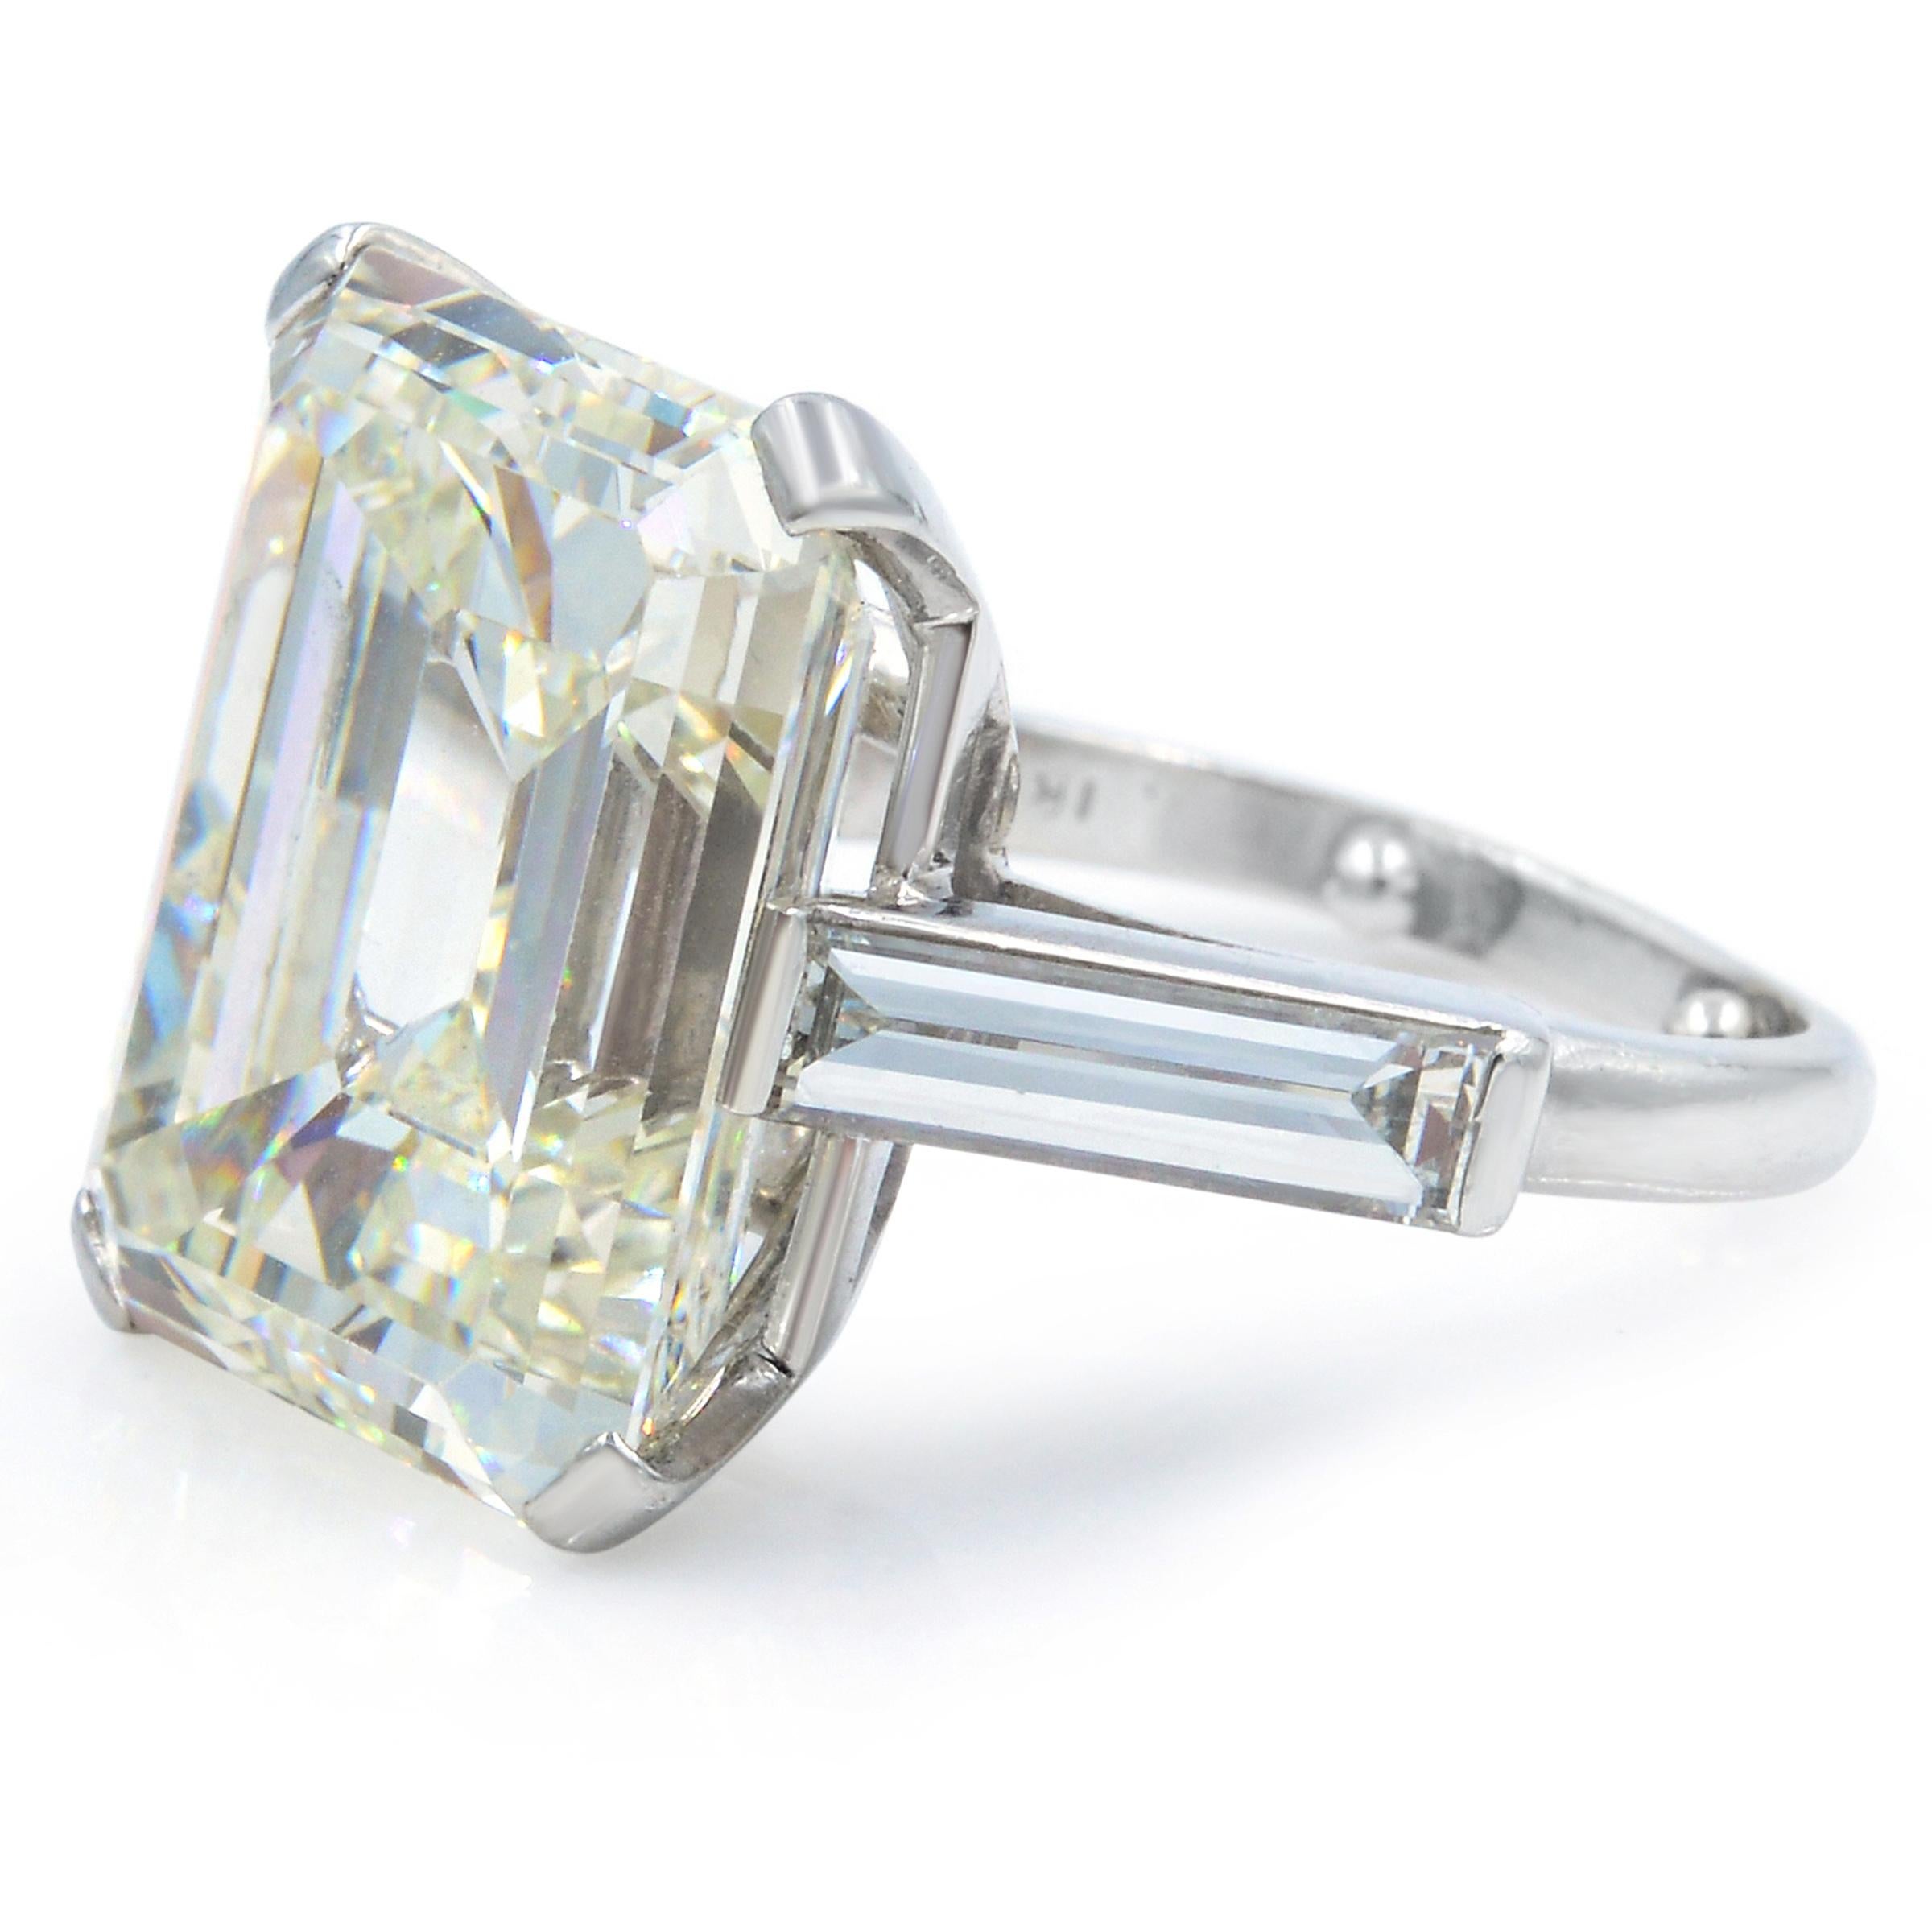 Impressive in both quality and scale, this true Art Deco engagement ring features a stunning Emerald Cut diamond of 11.27 in carats, accompanied with a GIA grading report indicating K color and VS1 clarity. The spectacular diamond is traditionally